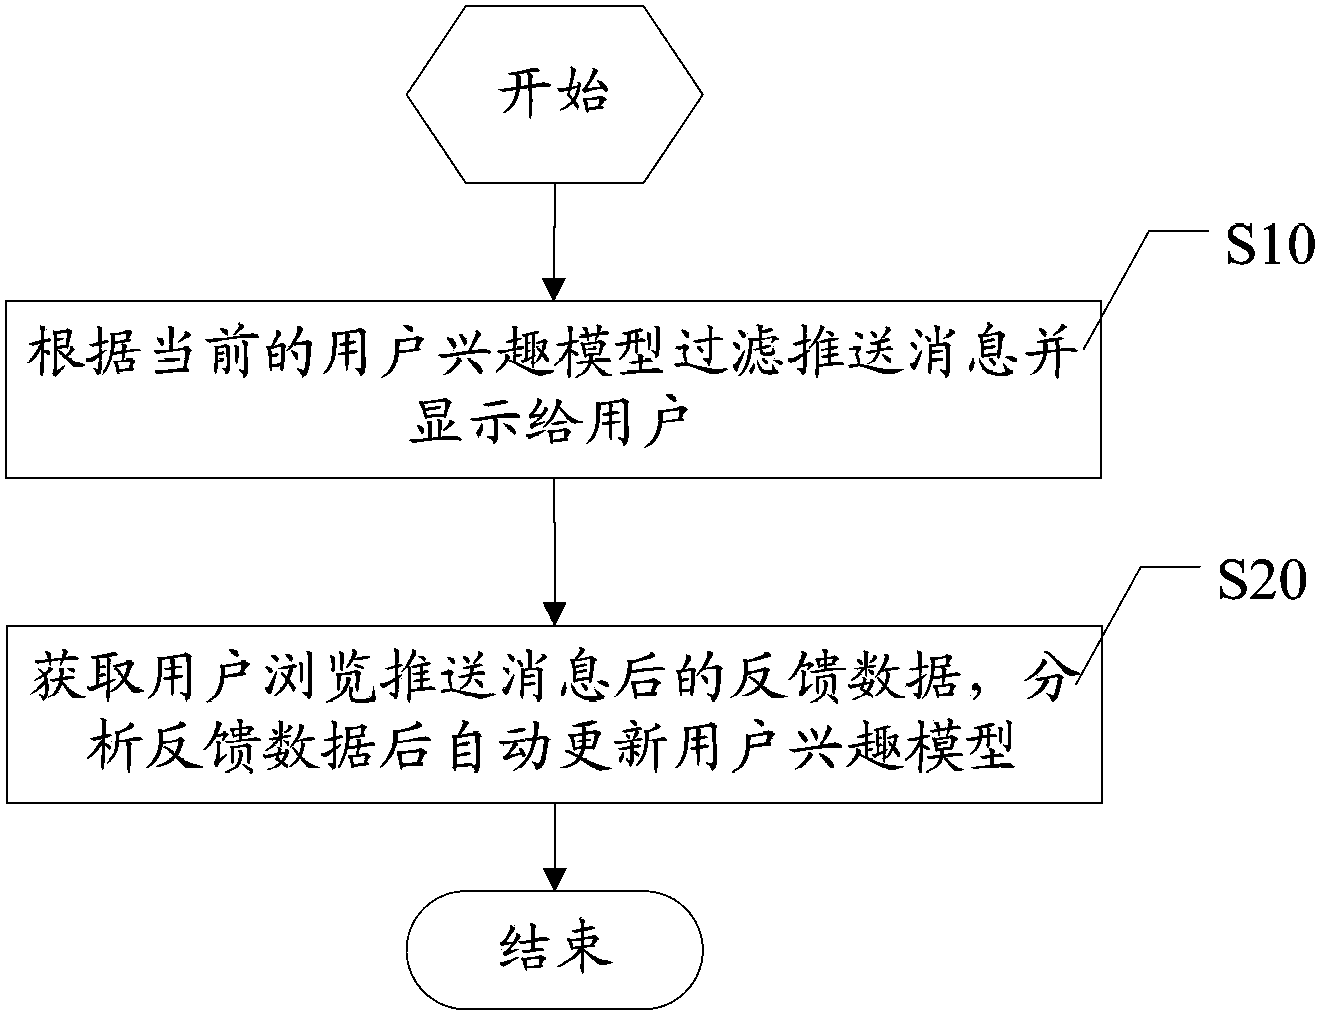 Method and device for automatically updating user interest model